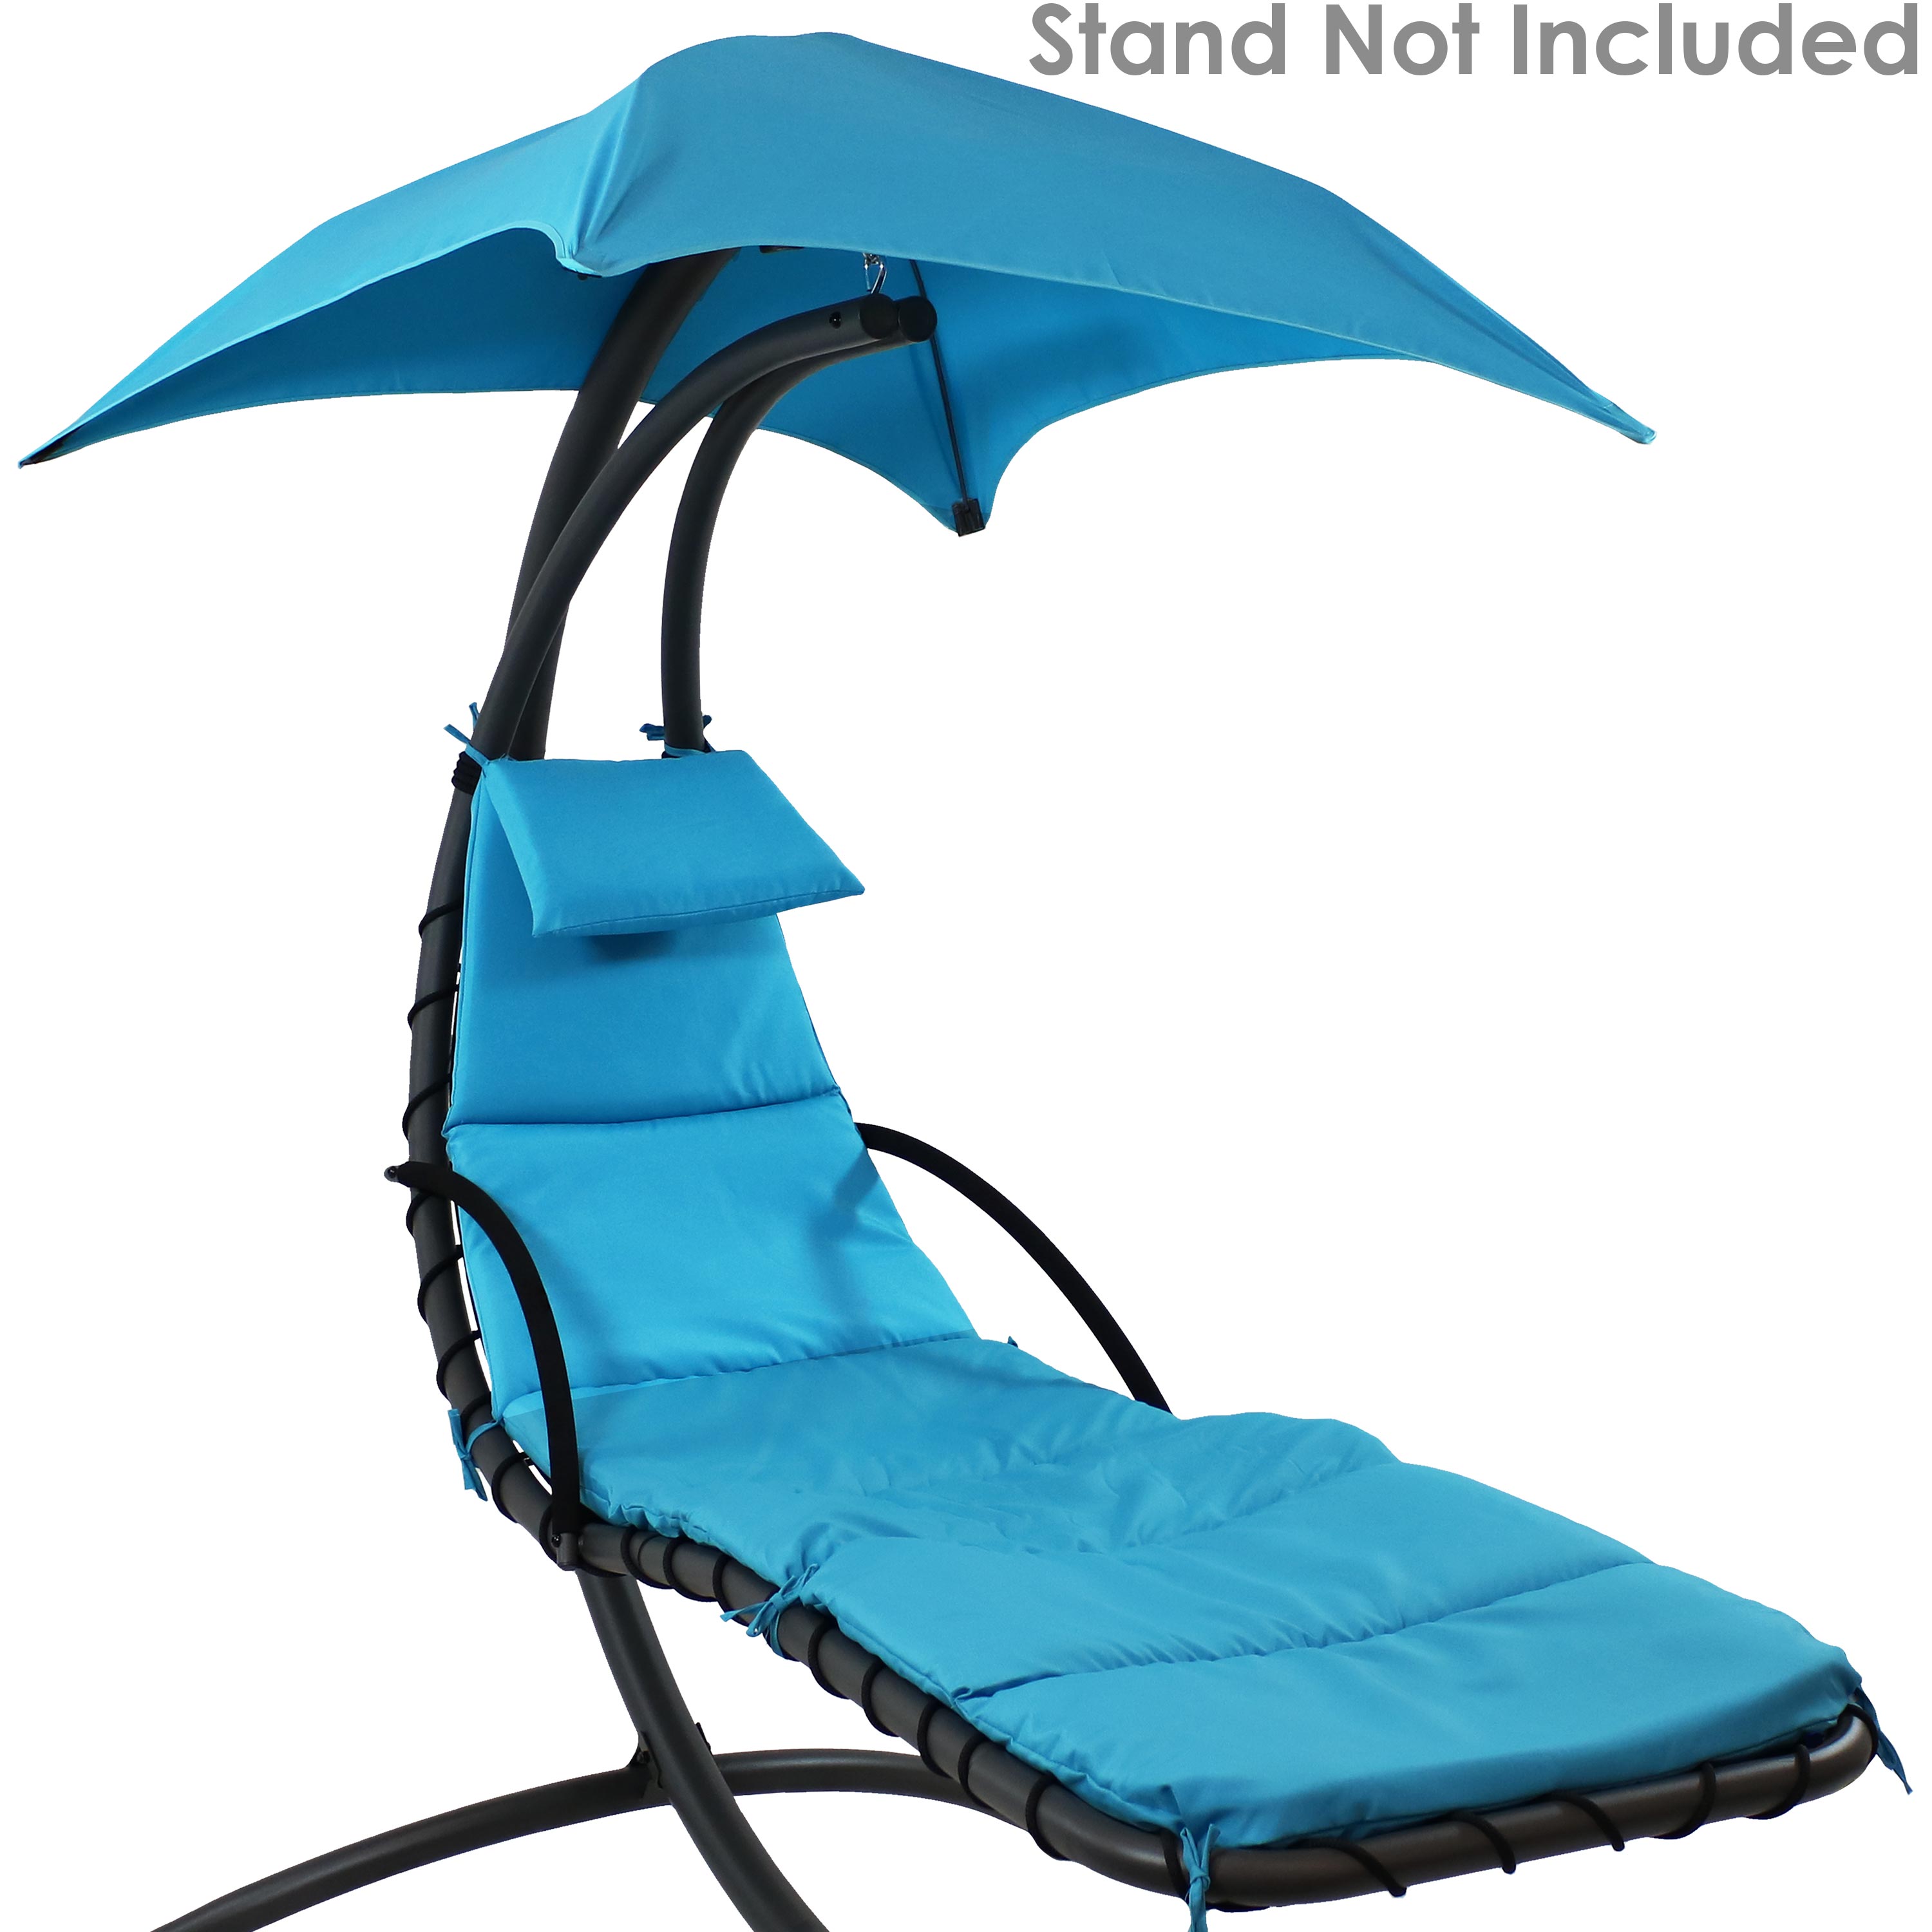 Outdoor Hanging Lounge Chair Replacement Cushion and Umbrella Fabric for Chaise Hanging Hammock Chair - image 3 of 3